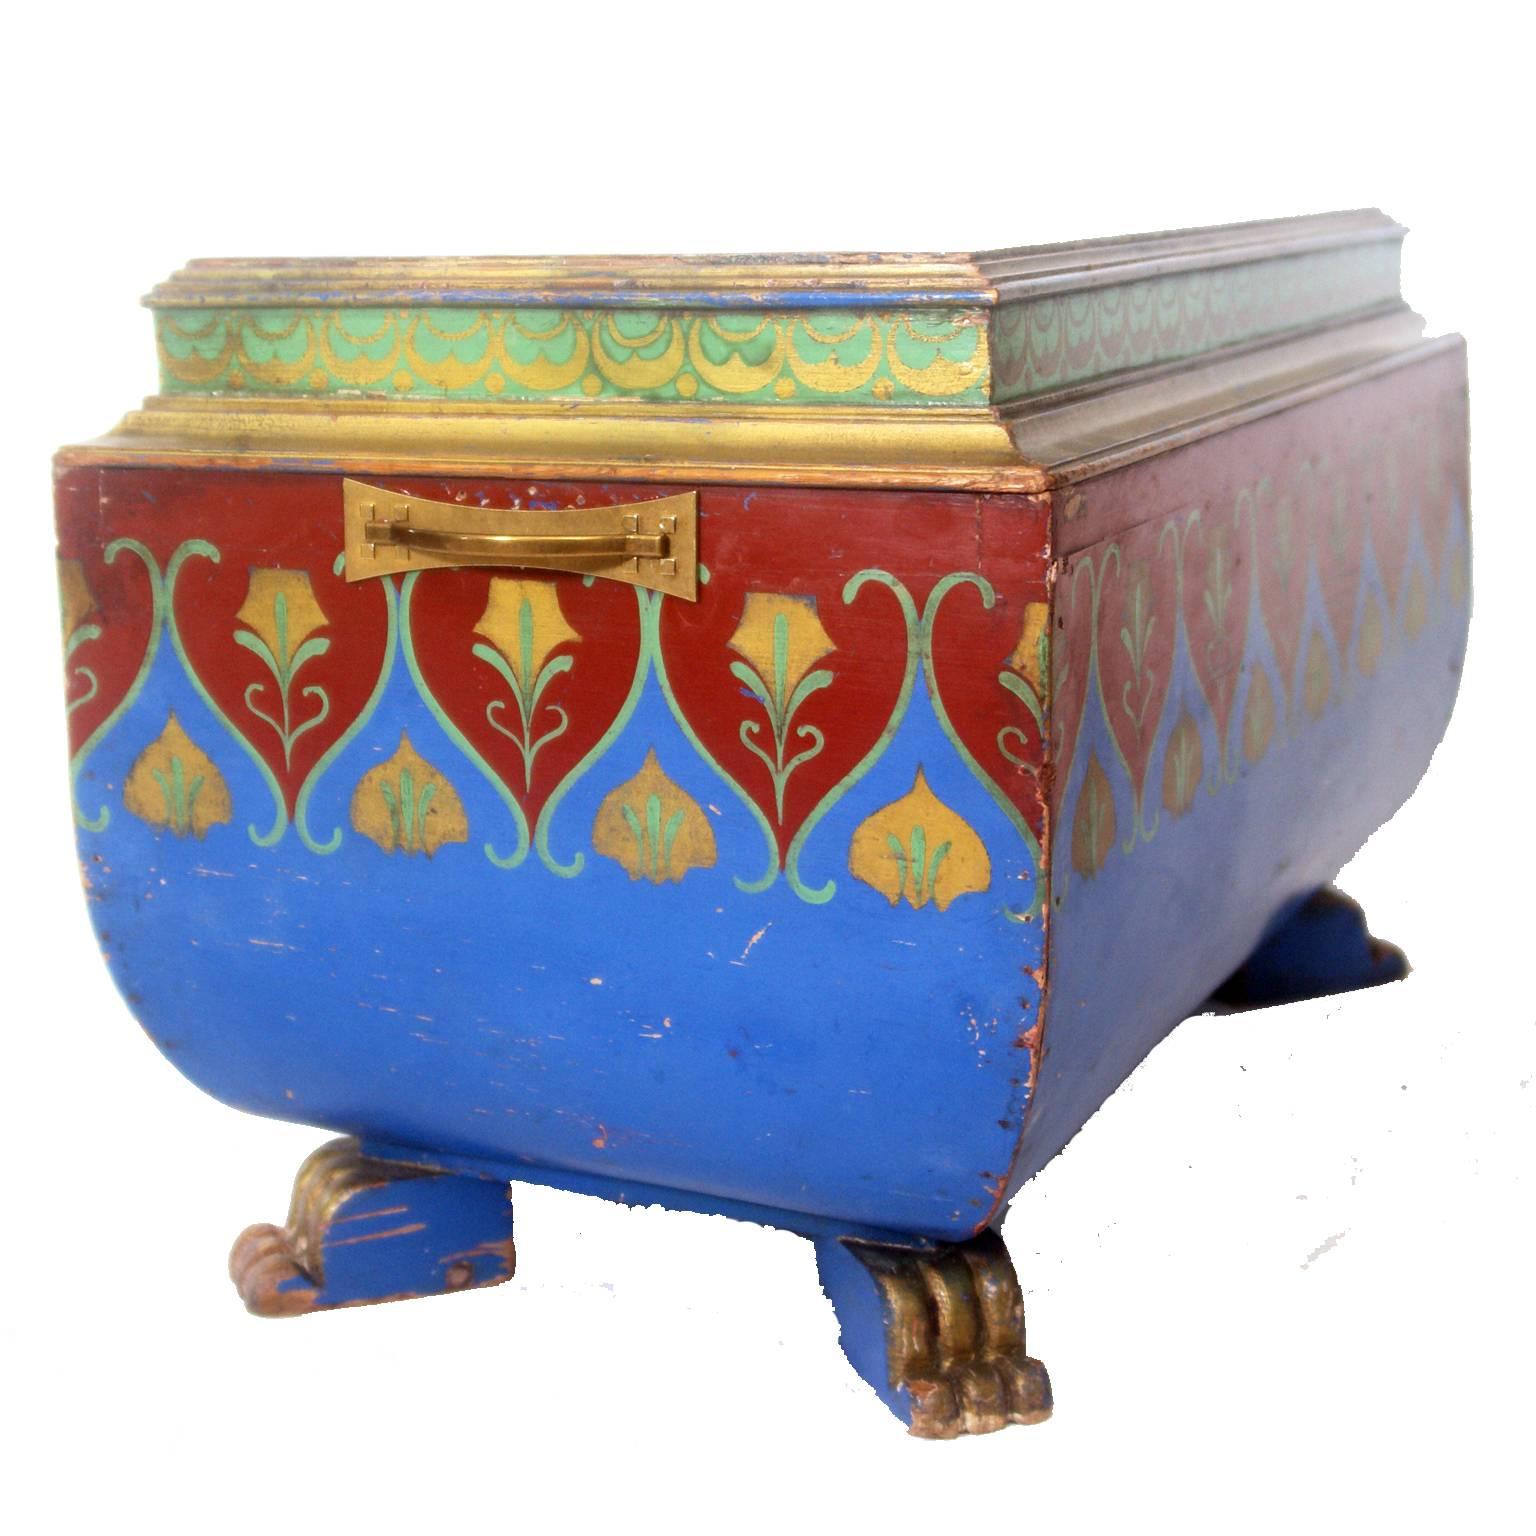 Late 19th century painted sarcophagus side table or footstool. In original unrestored condition this handmade, what appears to be, oak sarcophagus is in its original paint.
Stylistically Art Nouveau or Turkish Ottoman. The origin of the piece is